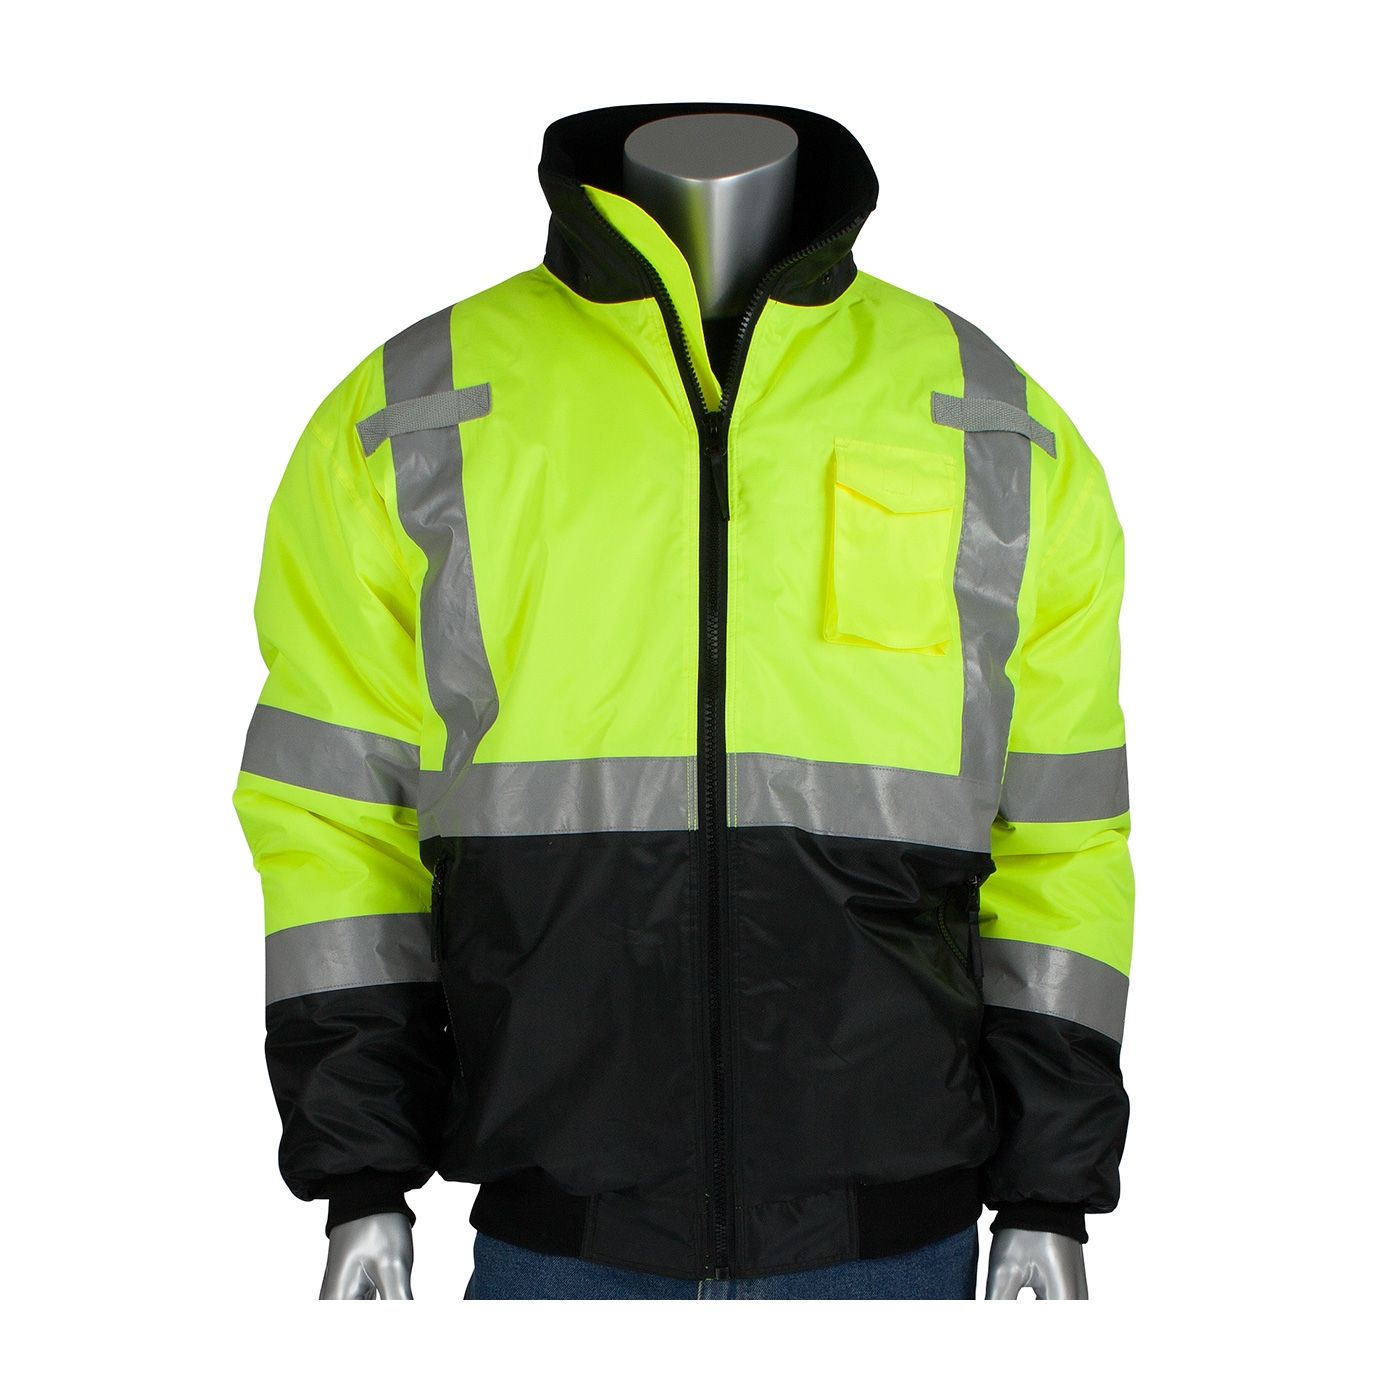 PIP 333-1740-OR Bomber Jacket with Quilted Liner, Class 3, Hi-Vis Orange, 1 Each